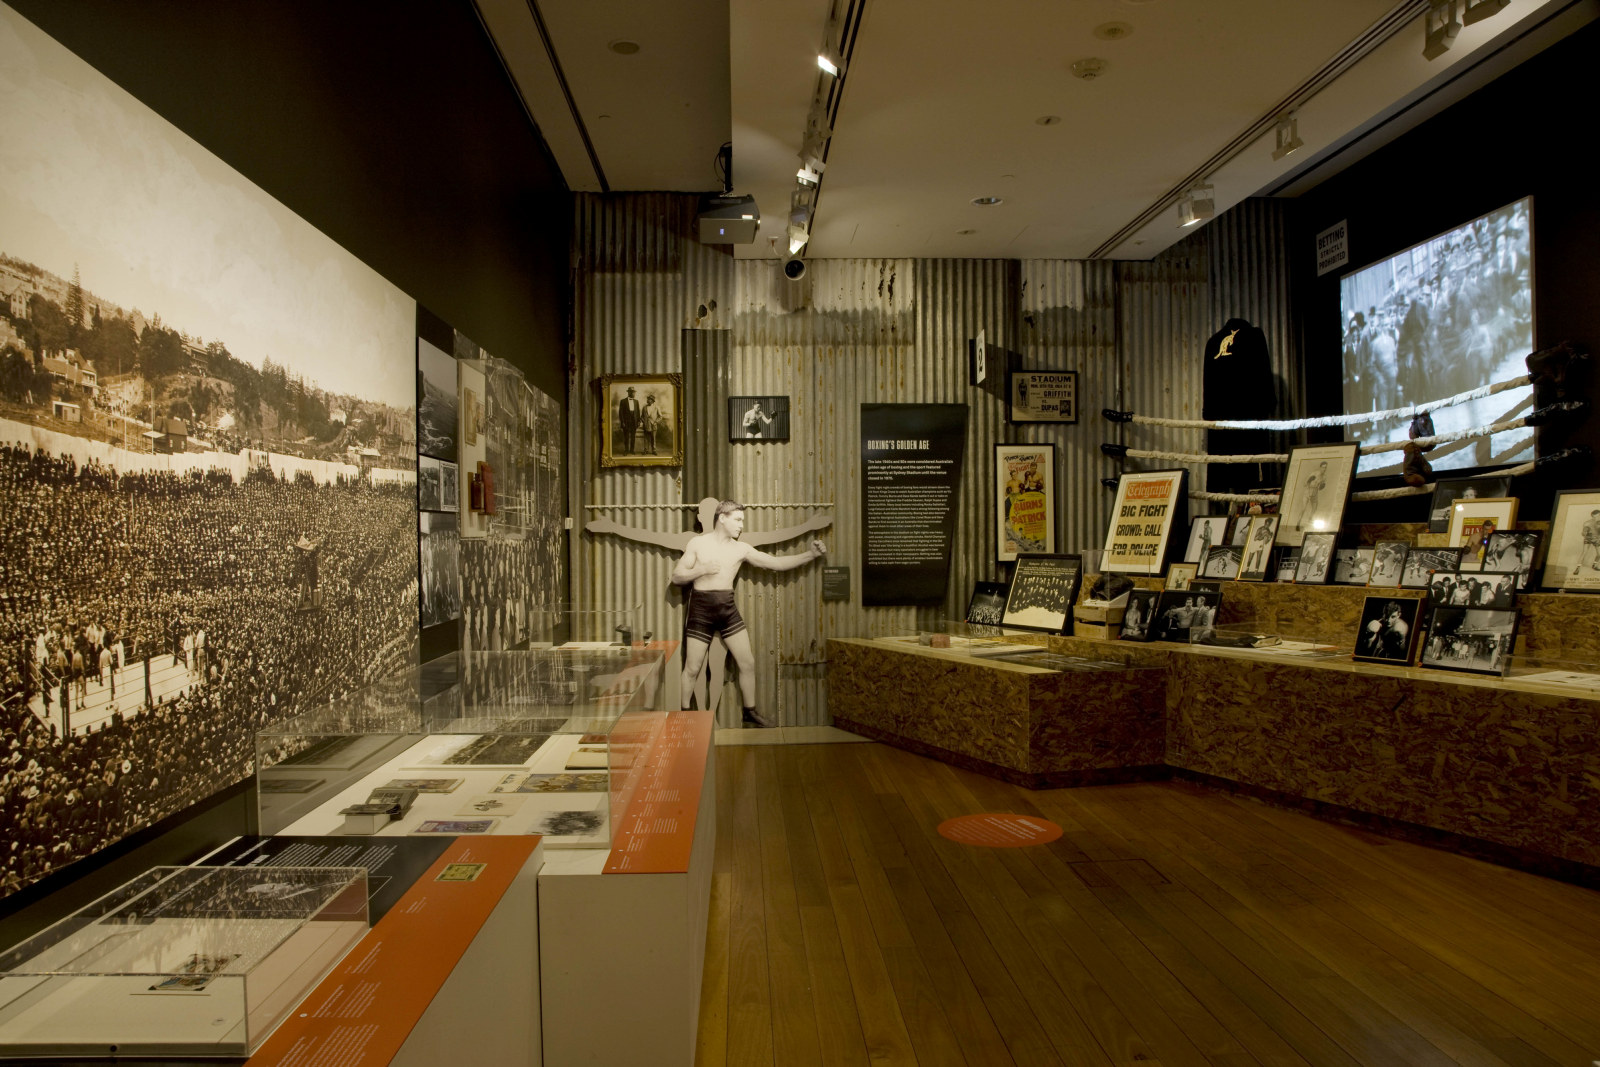 Exhibition interior showing display cases and pictures on the walls.